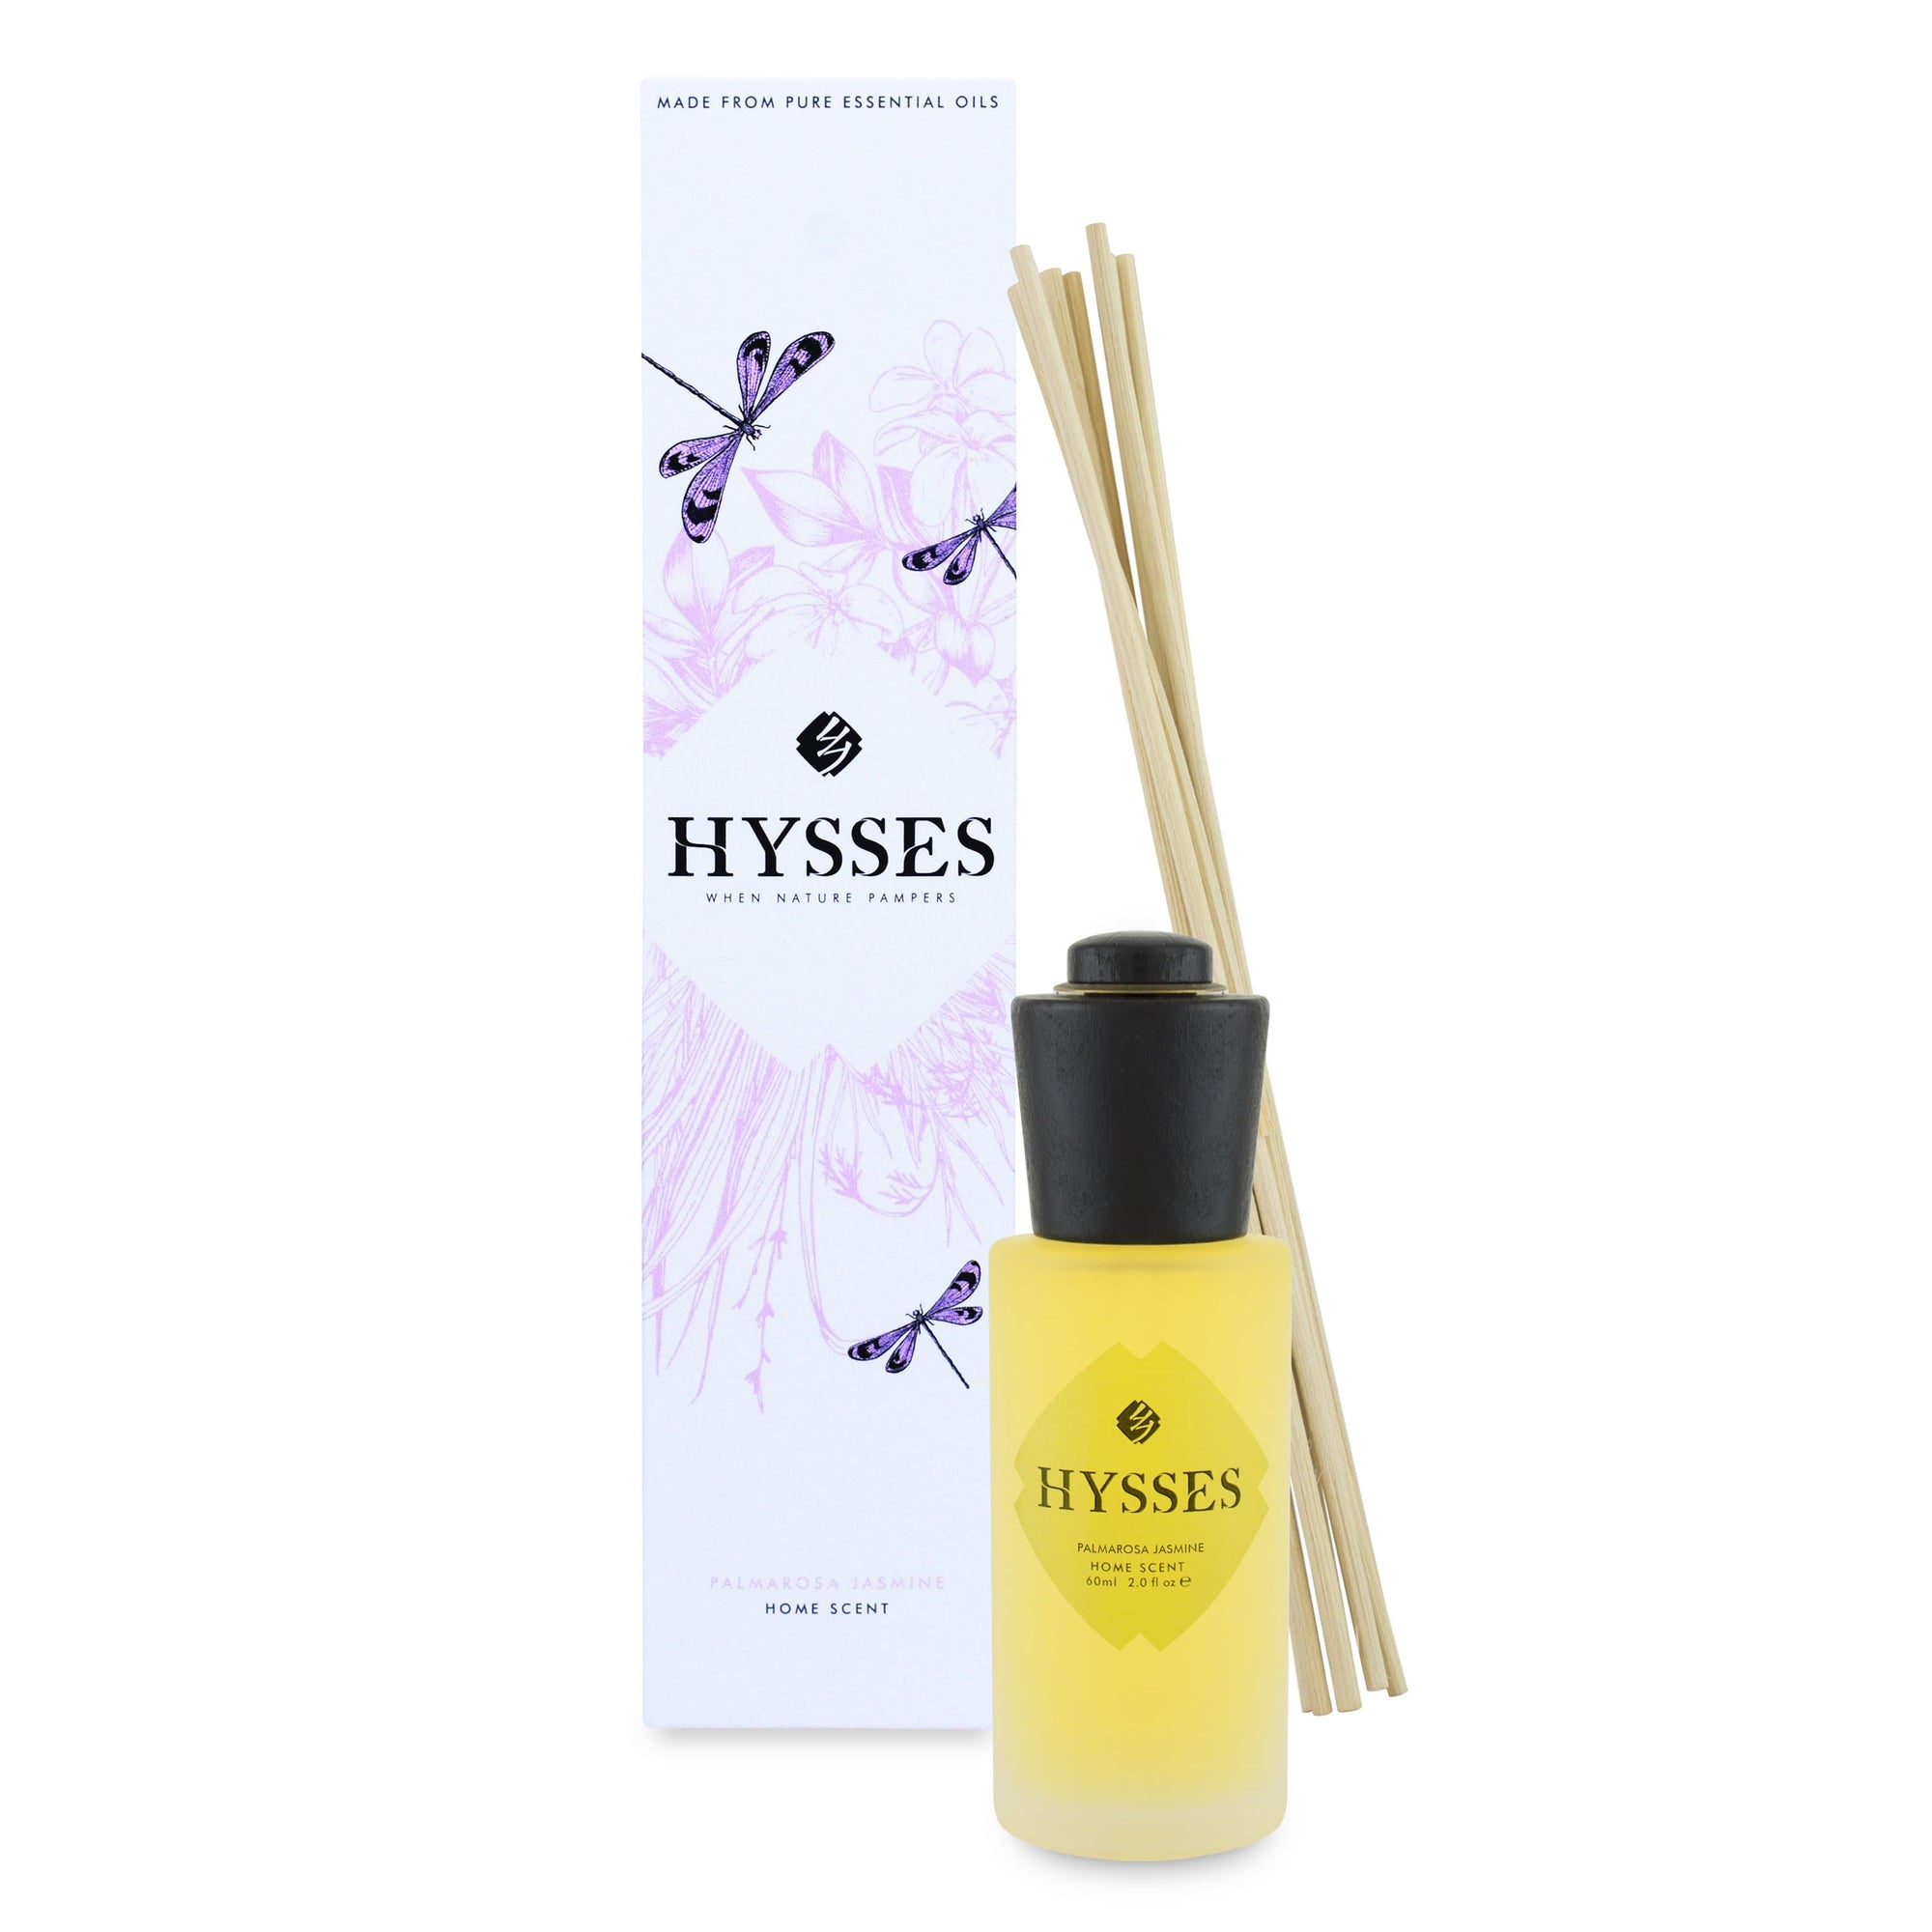 Hysses Home Scents 60ml Home Scent Reed Diffuser Palmarosa Jasmine